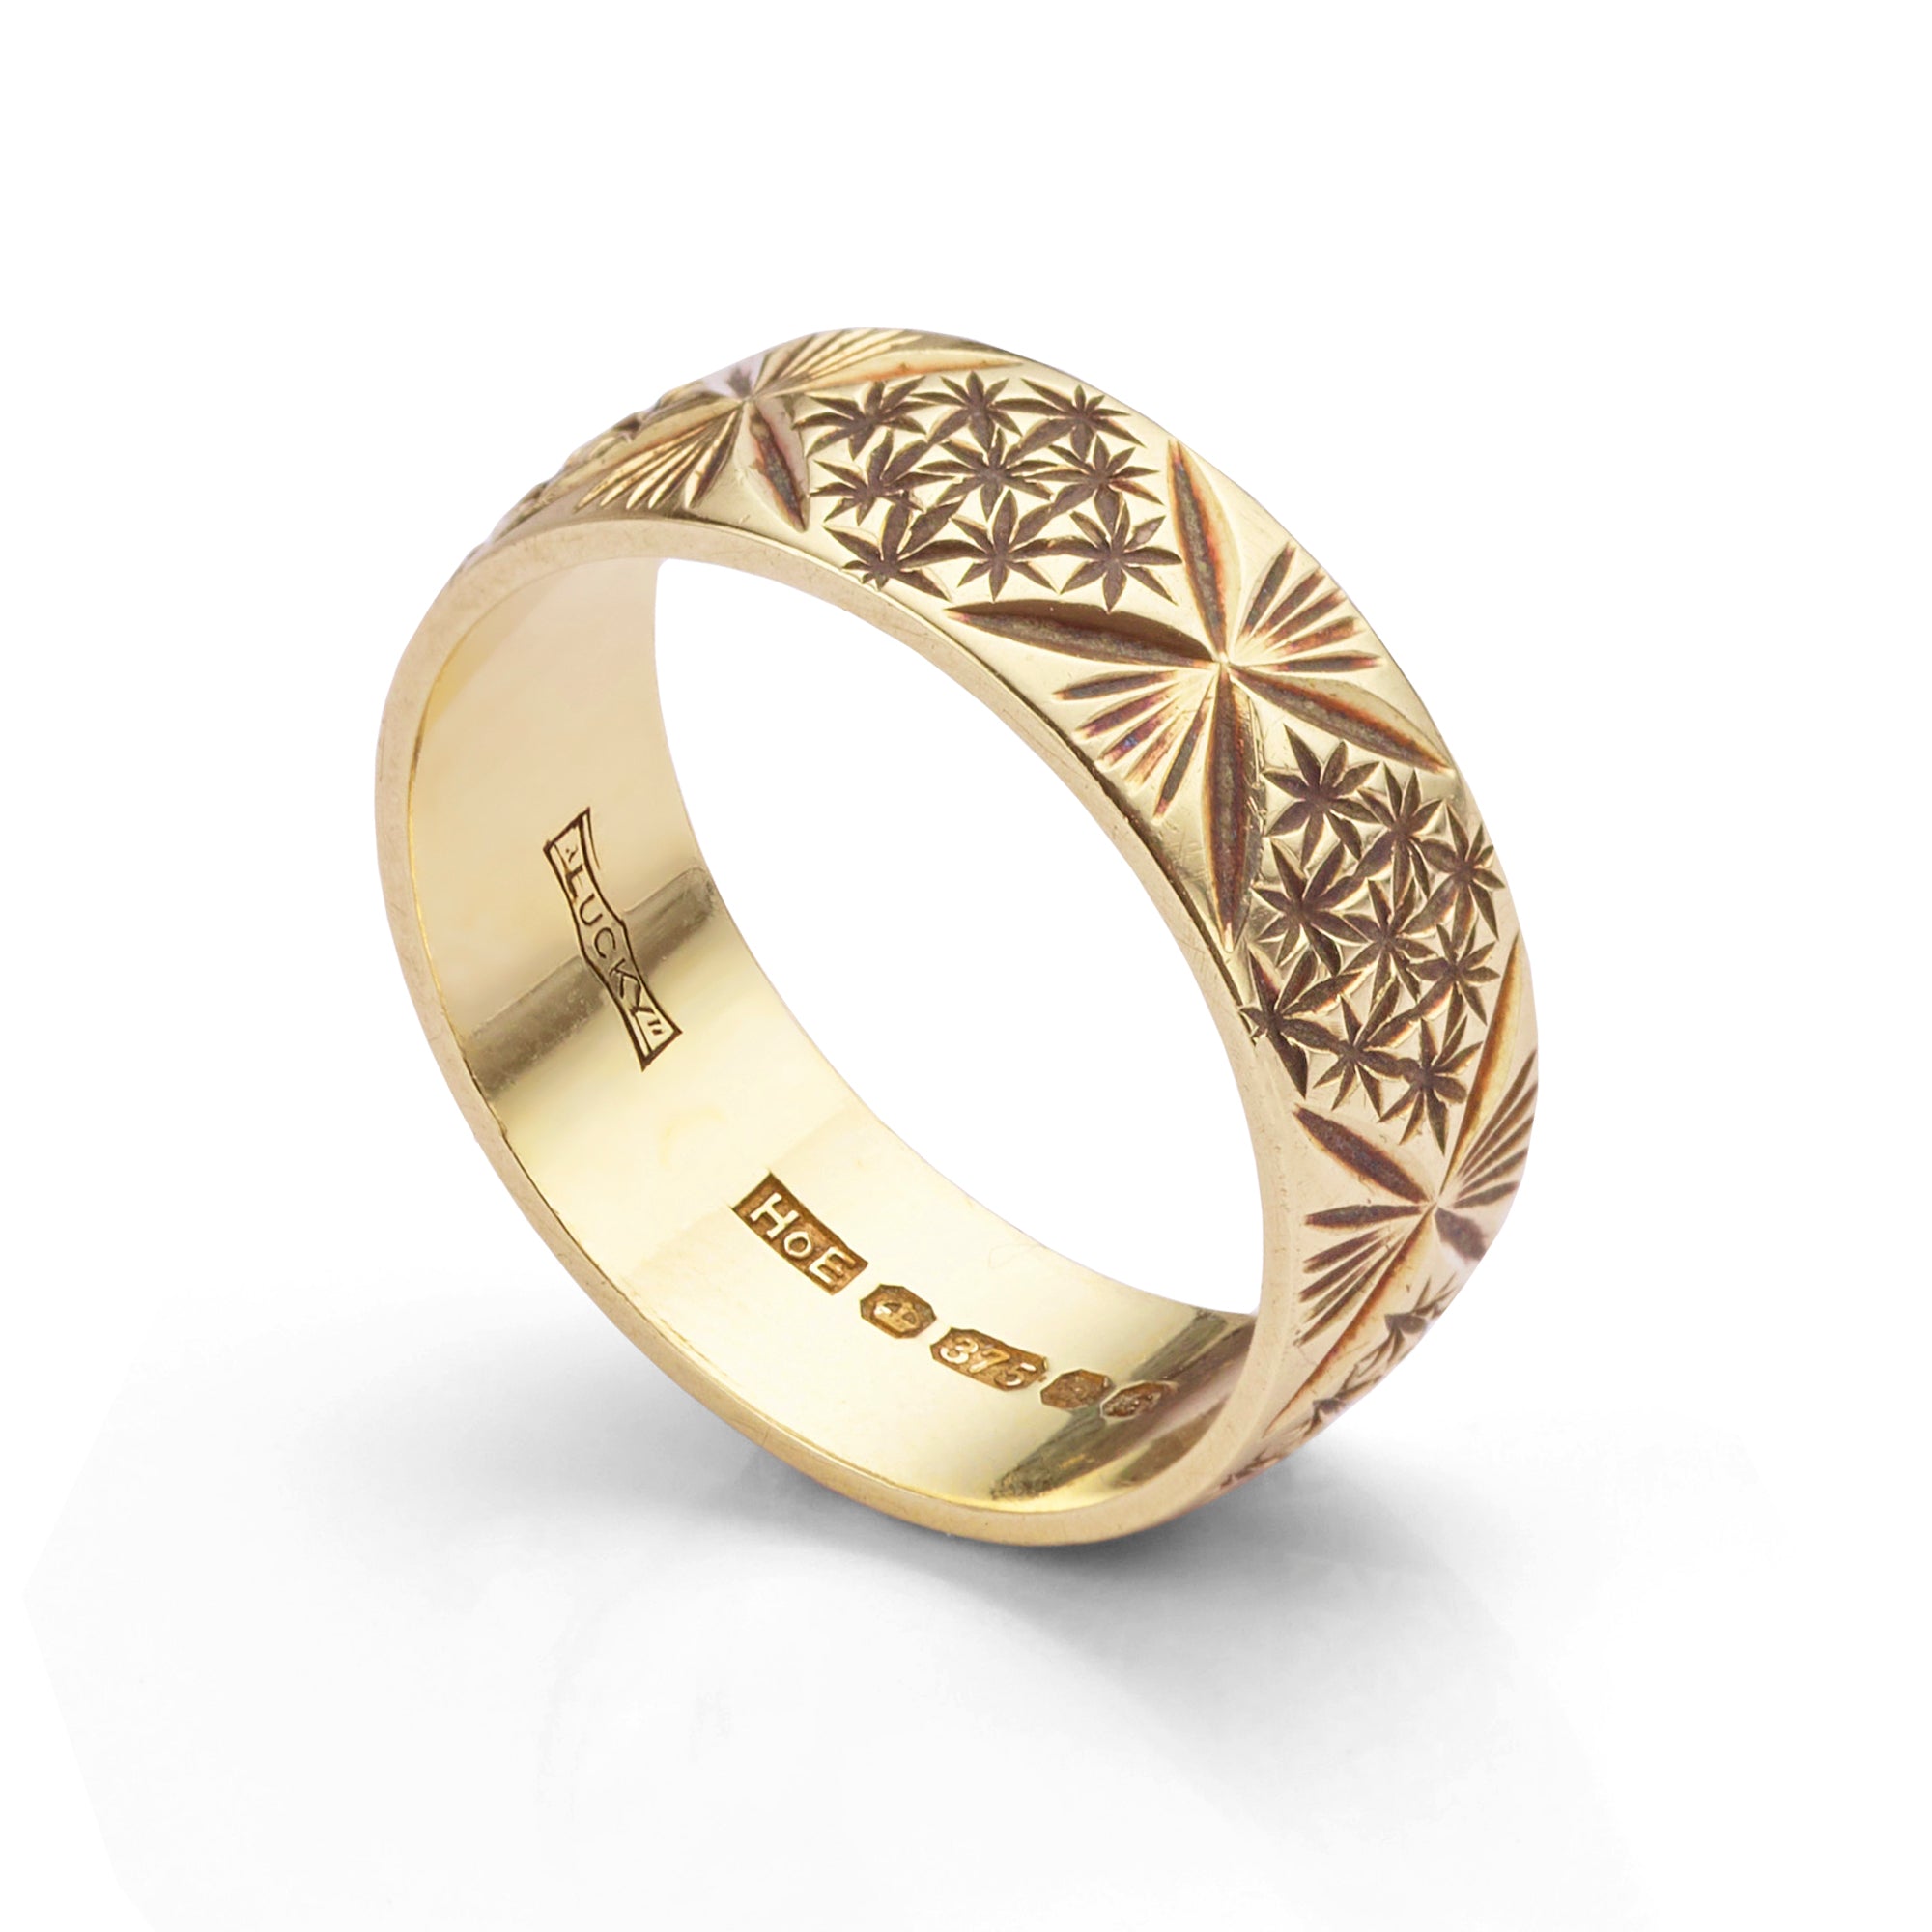 Pre-owned star patterned 9ct yellow gold wedding ring